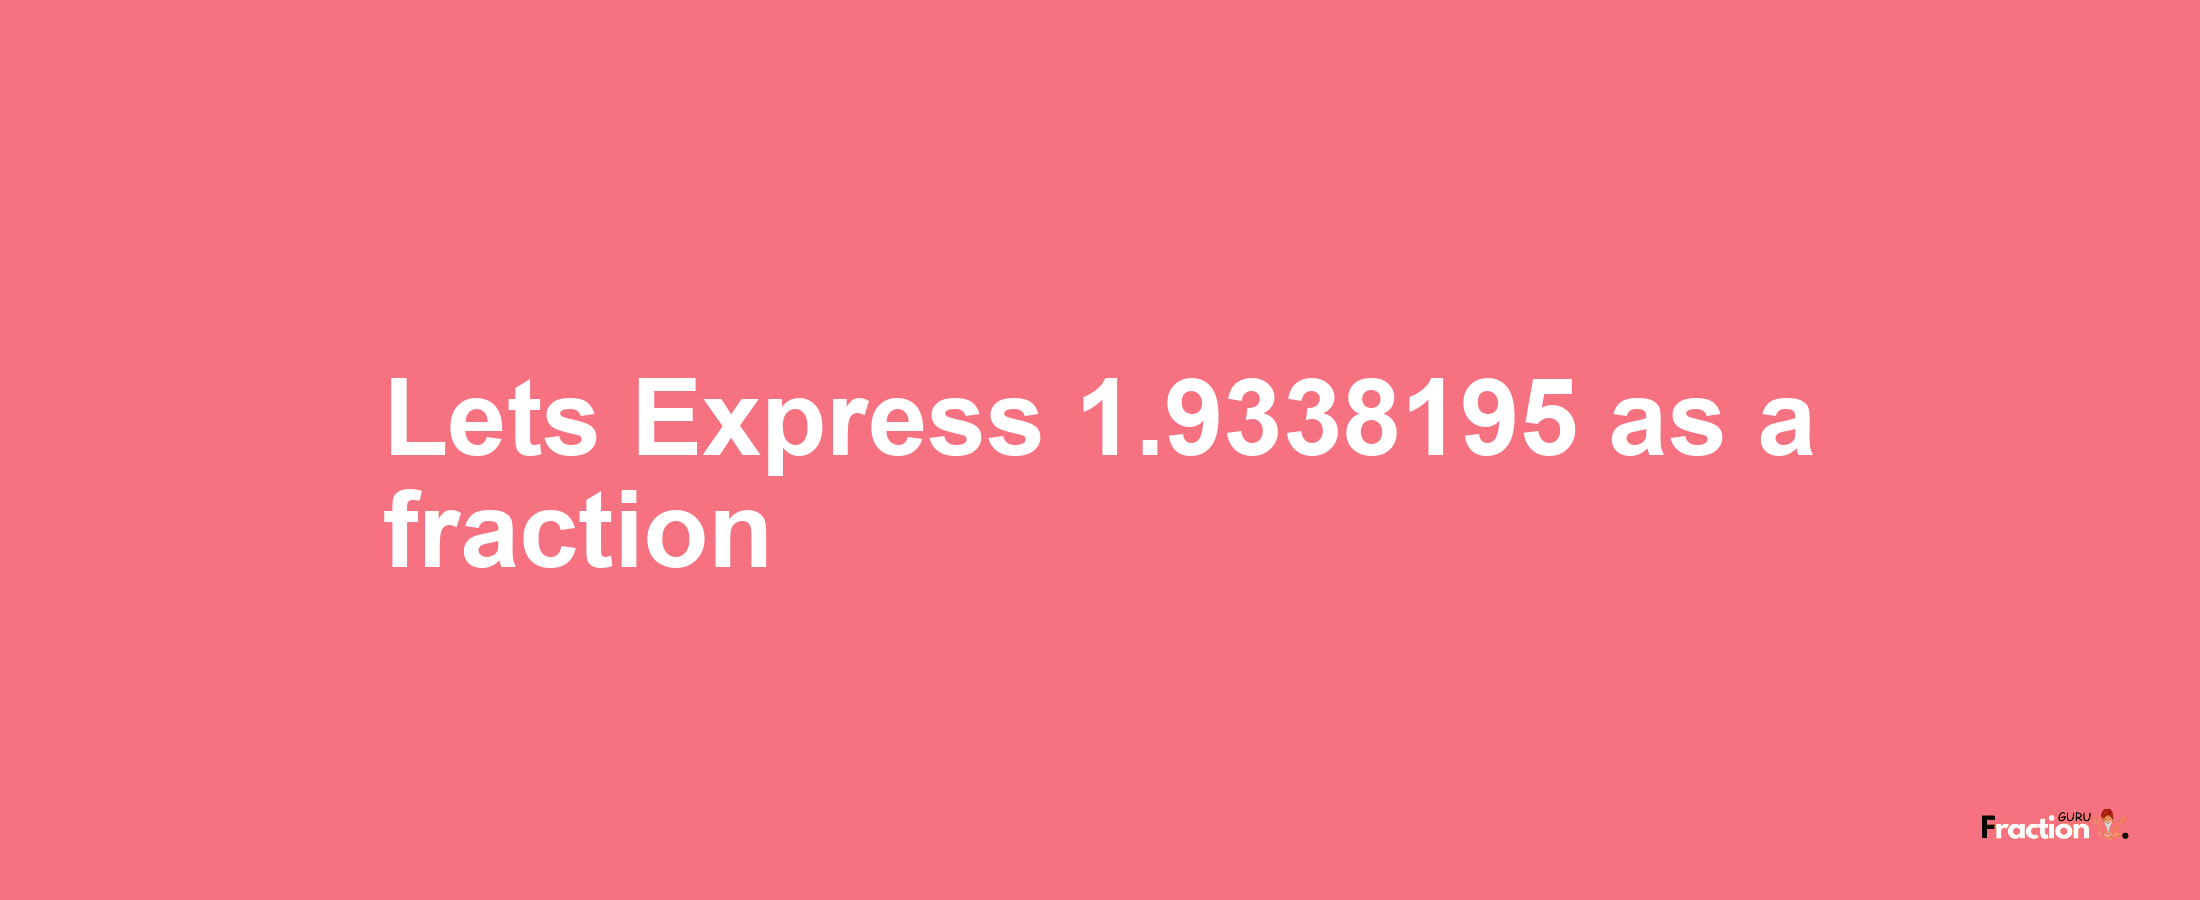 Lets Express 1.9338195 as afraction